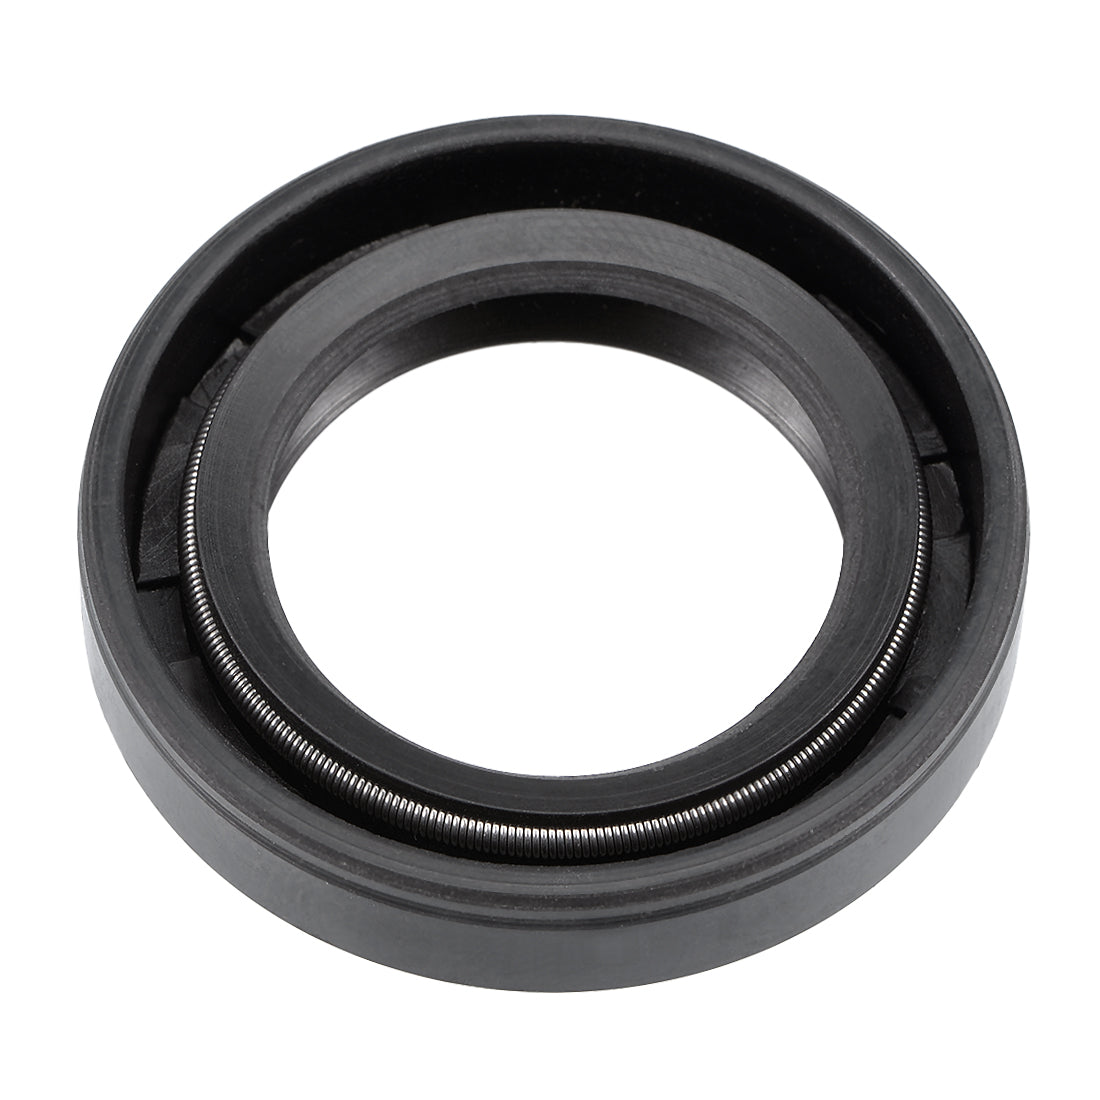 Uxcell Uxcell Oil Seal, TC 22mm x 34mm x 7mm, Nitrile Rubber Cover Double Lip